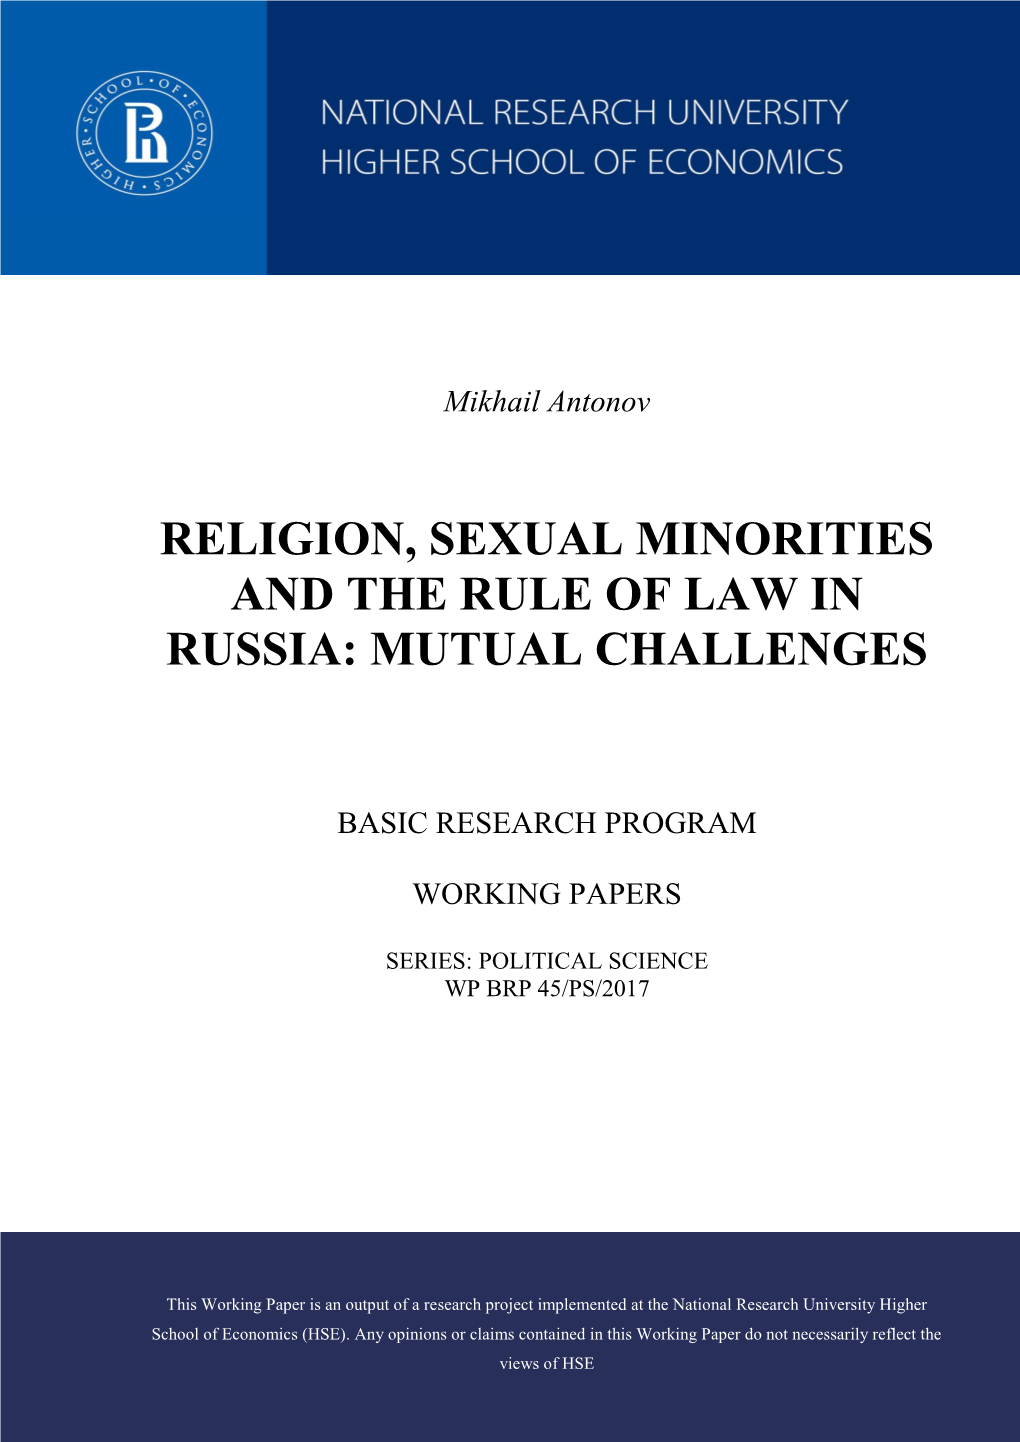 "Religion, Sexual Minorities and the Rule of Law in Russia: Mutual Challenges", Series